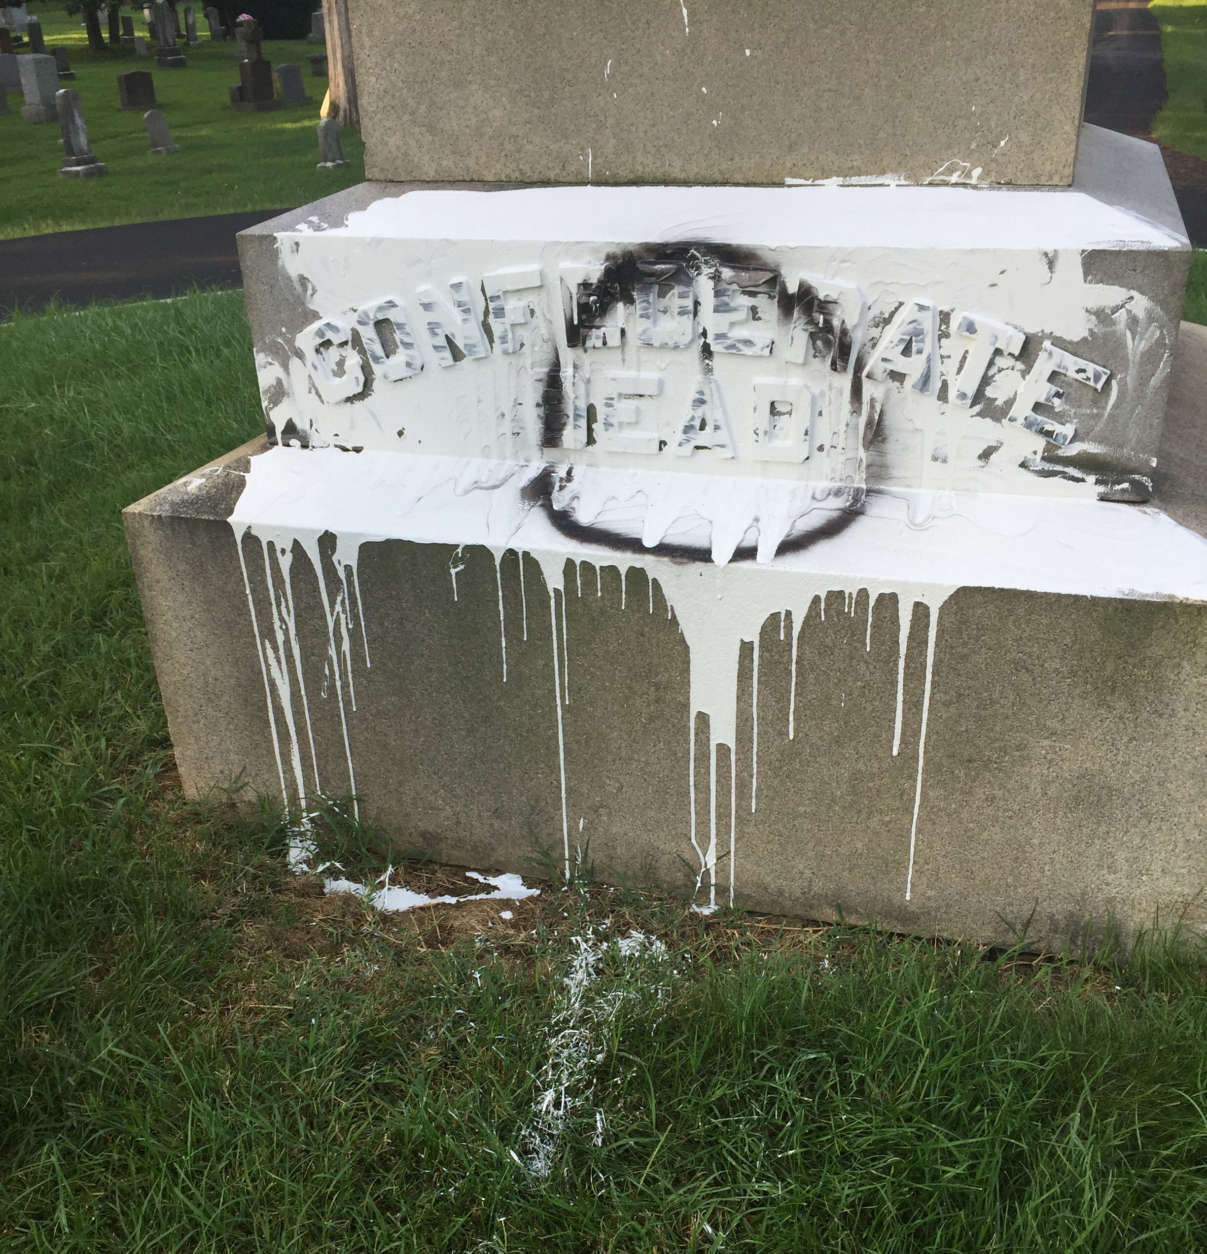 In the early hours of Thursday, someone splashed white pain on the base of the Confederate graves monument. (Courtesy Fairfax City)